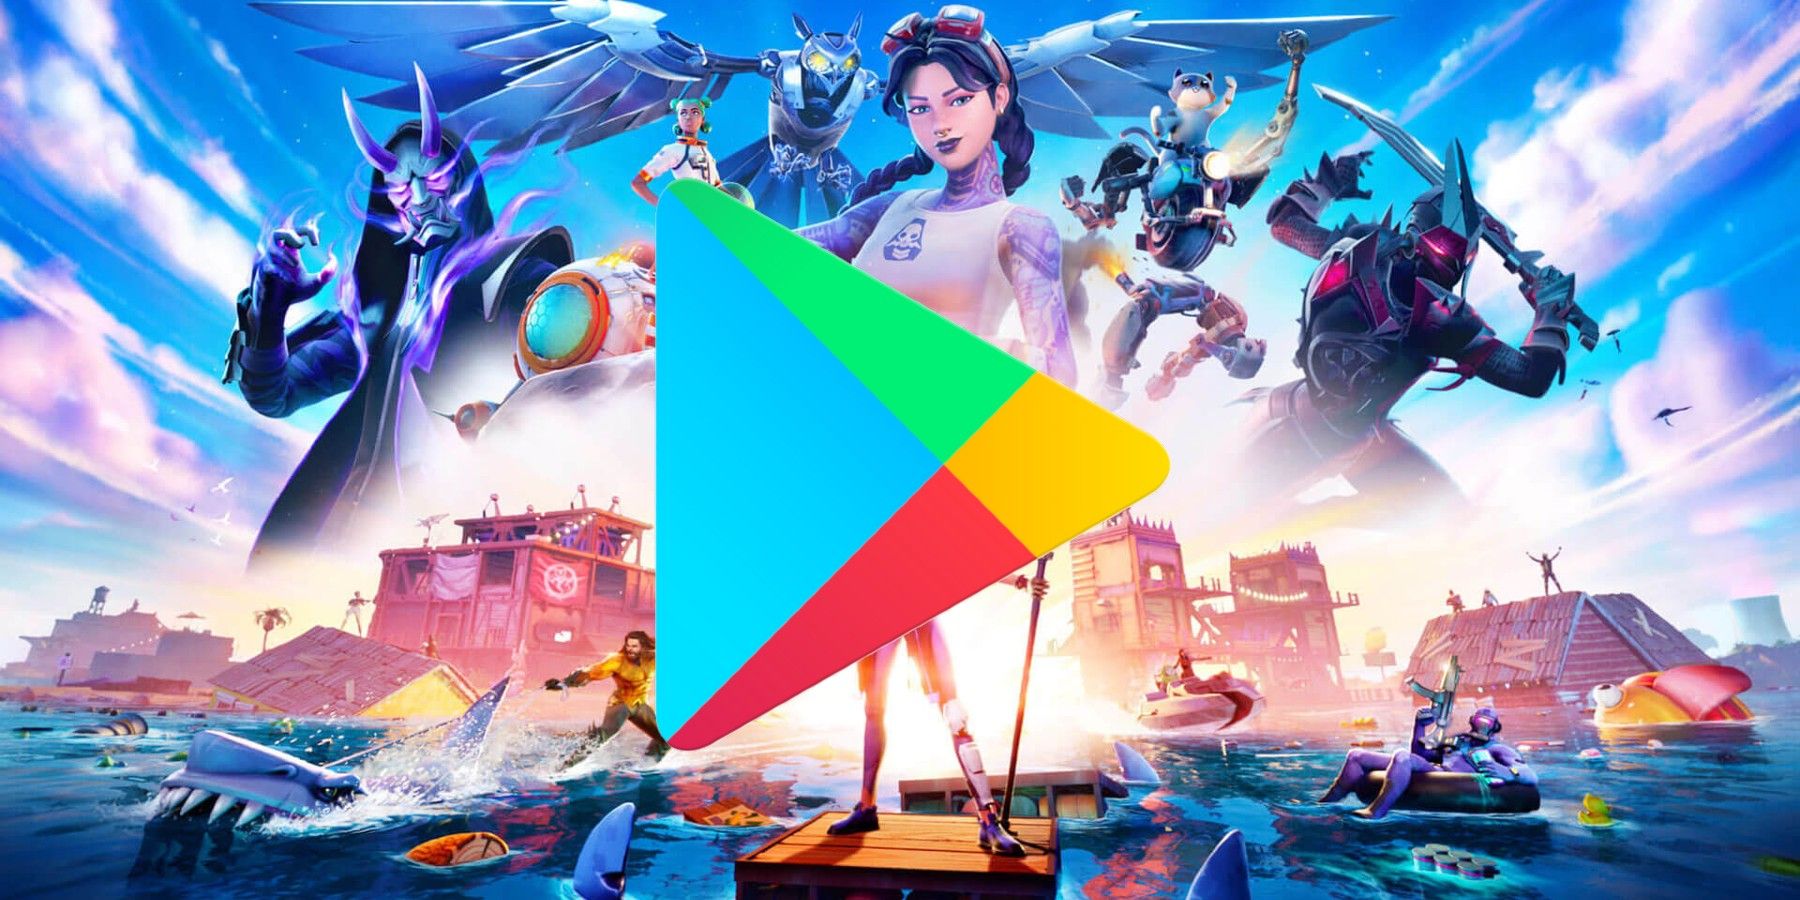 Fortnite Has Now Been Kicked Off The Google Play Store, Too